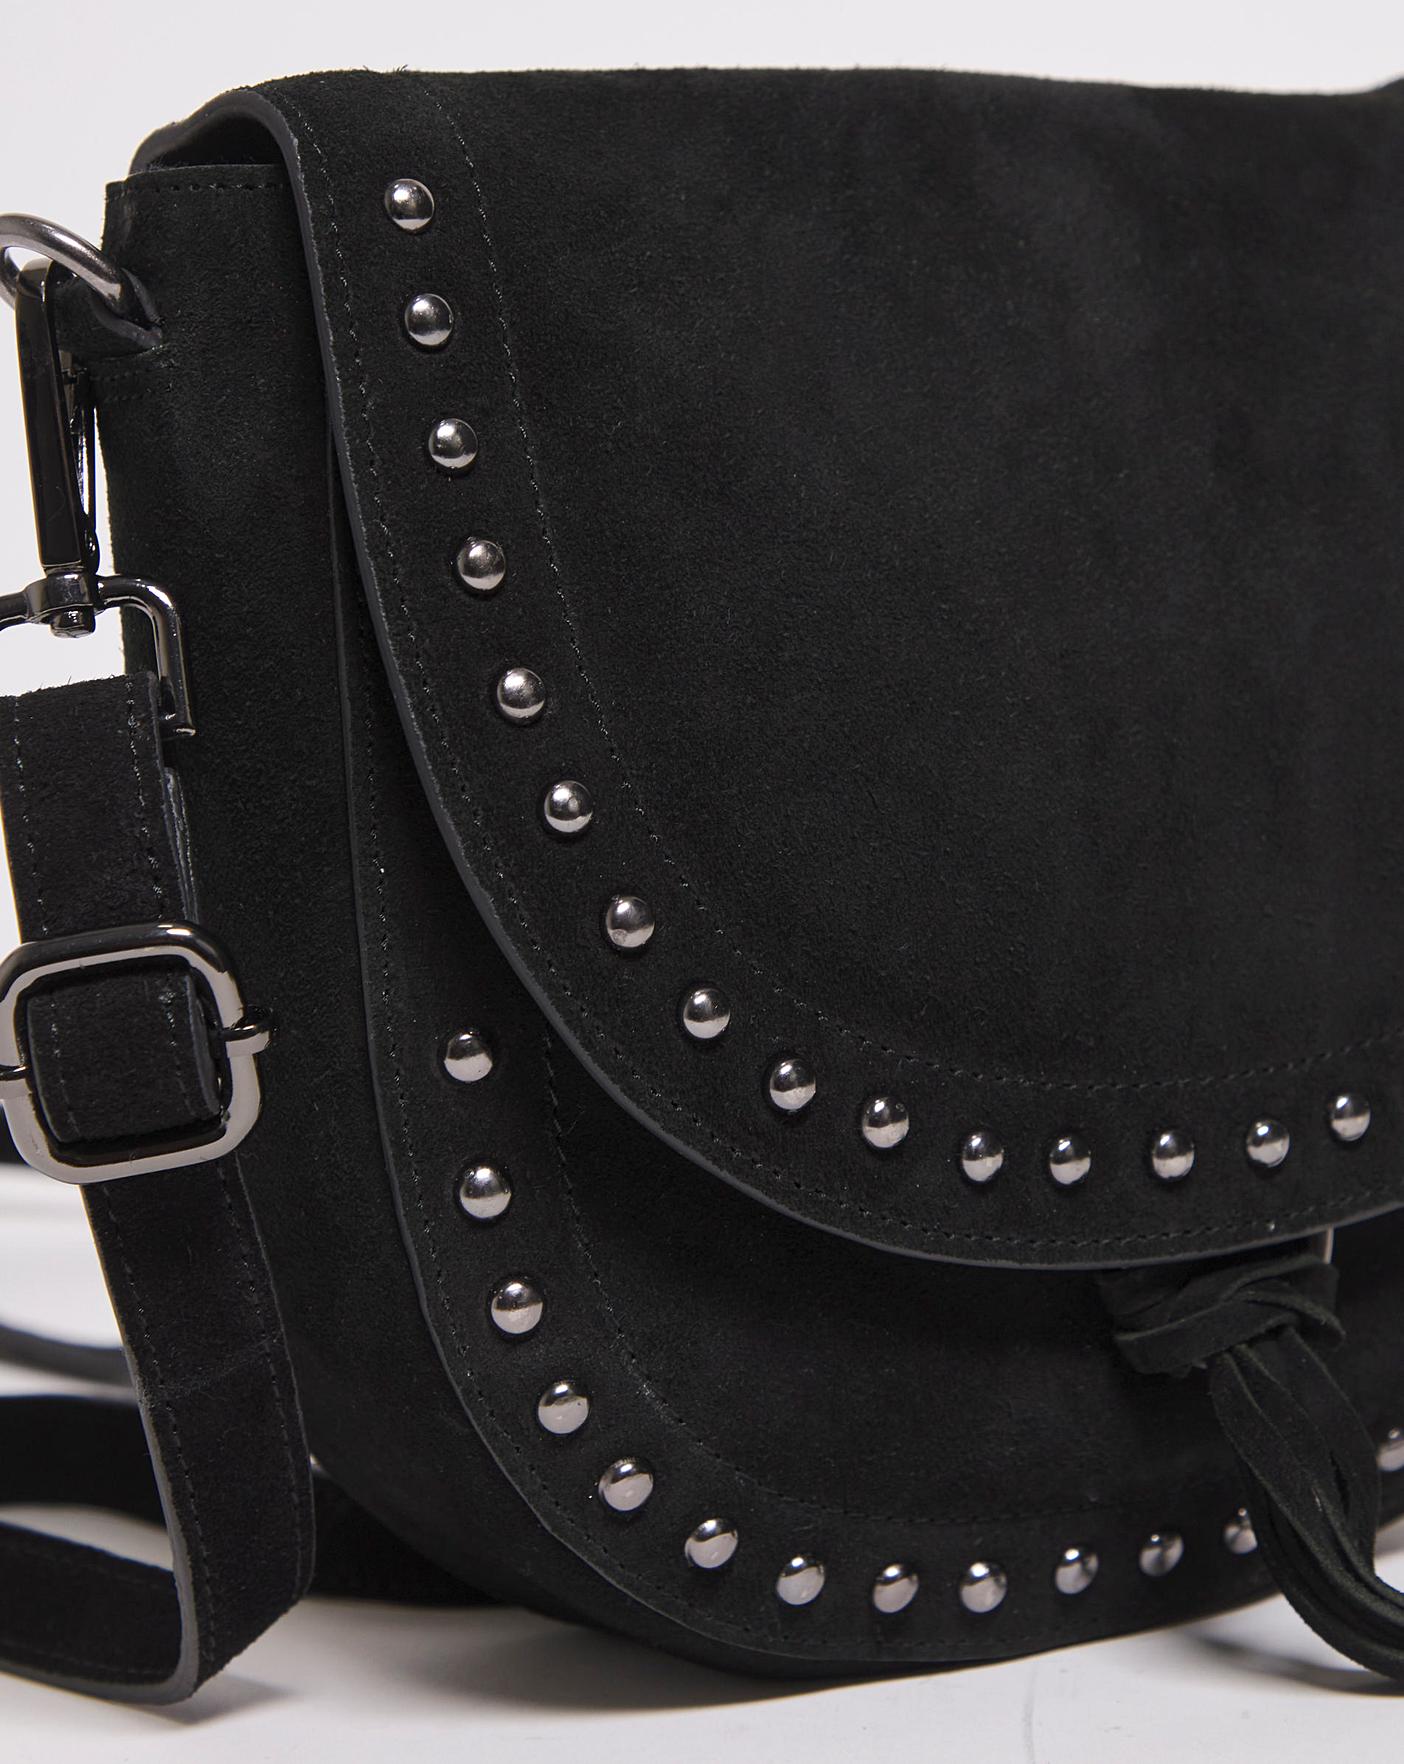 Studded Sling Bags - Buy Studded Sling Bags online in India